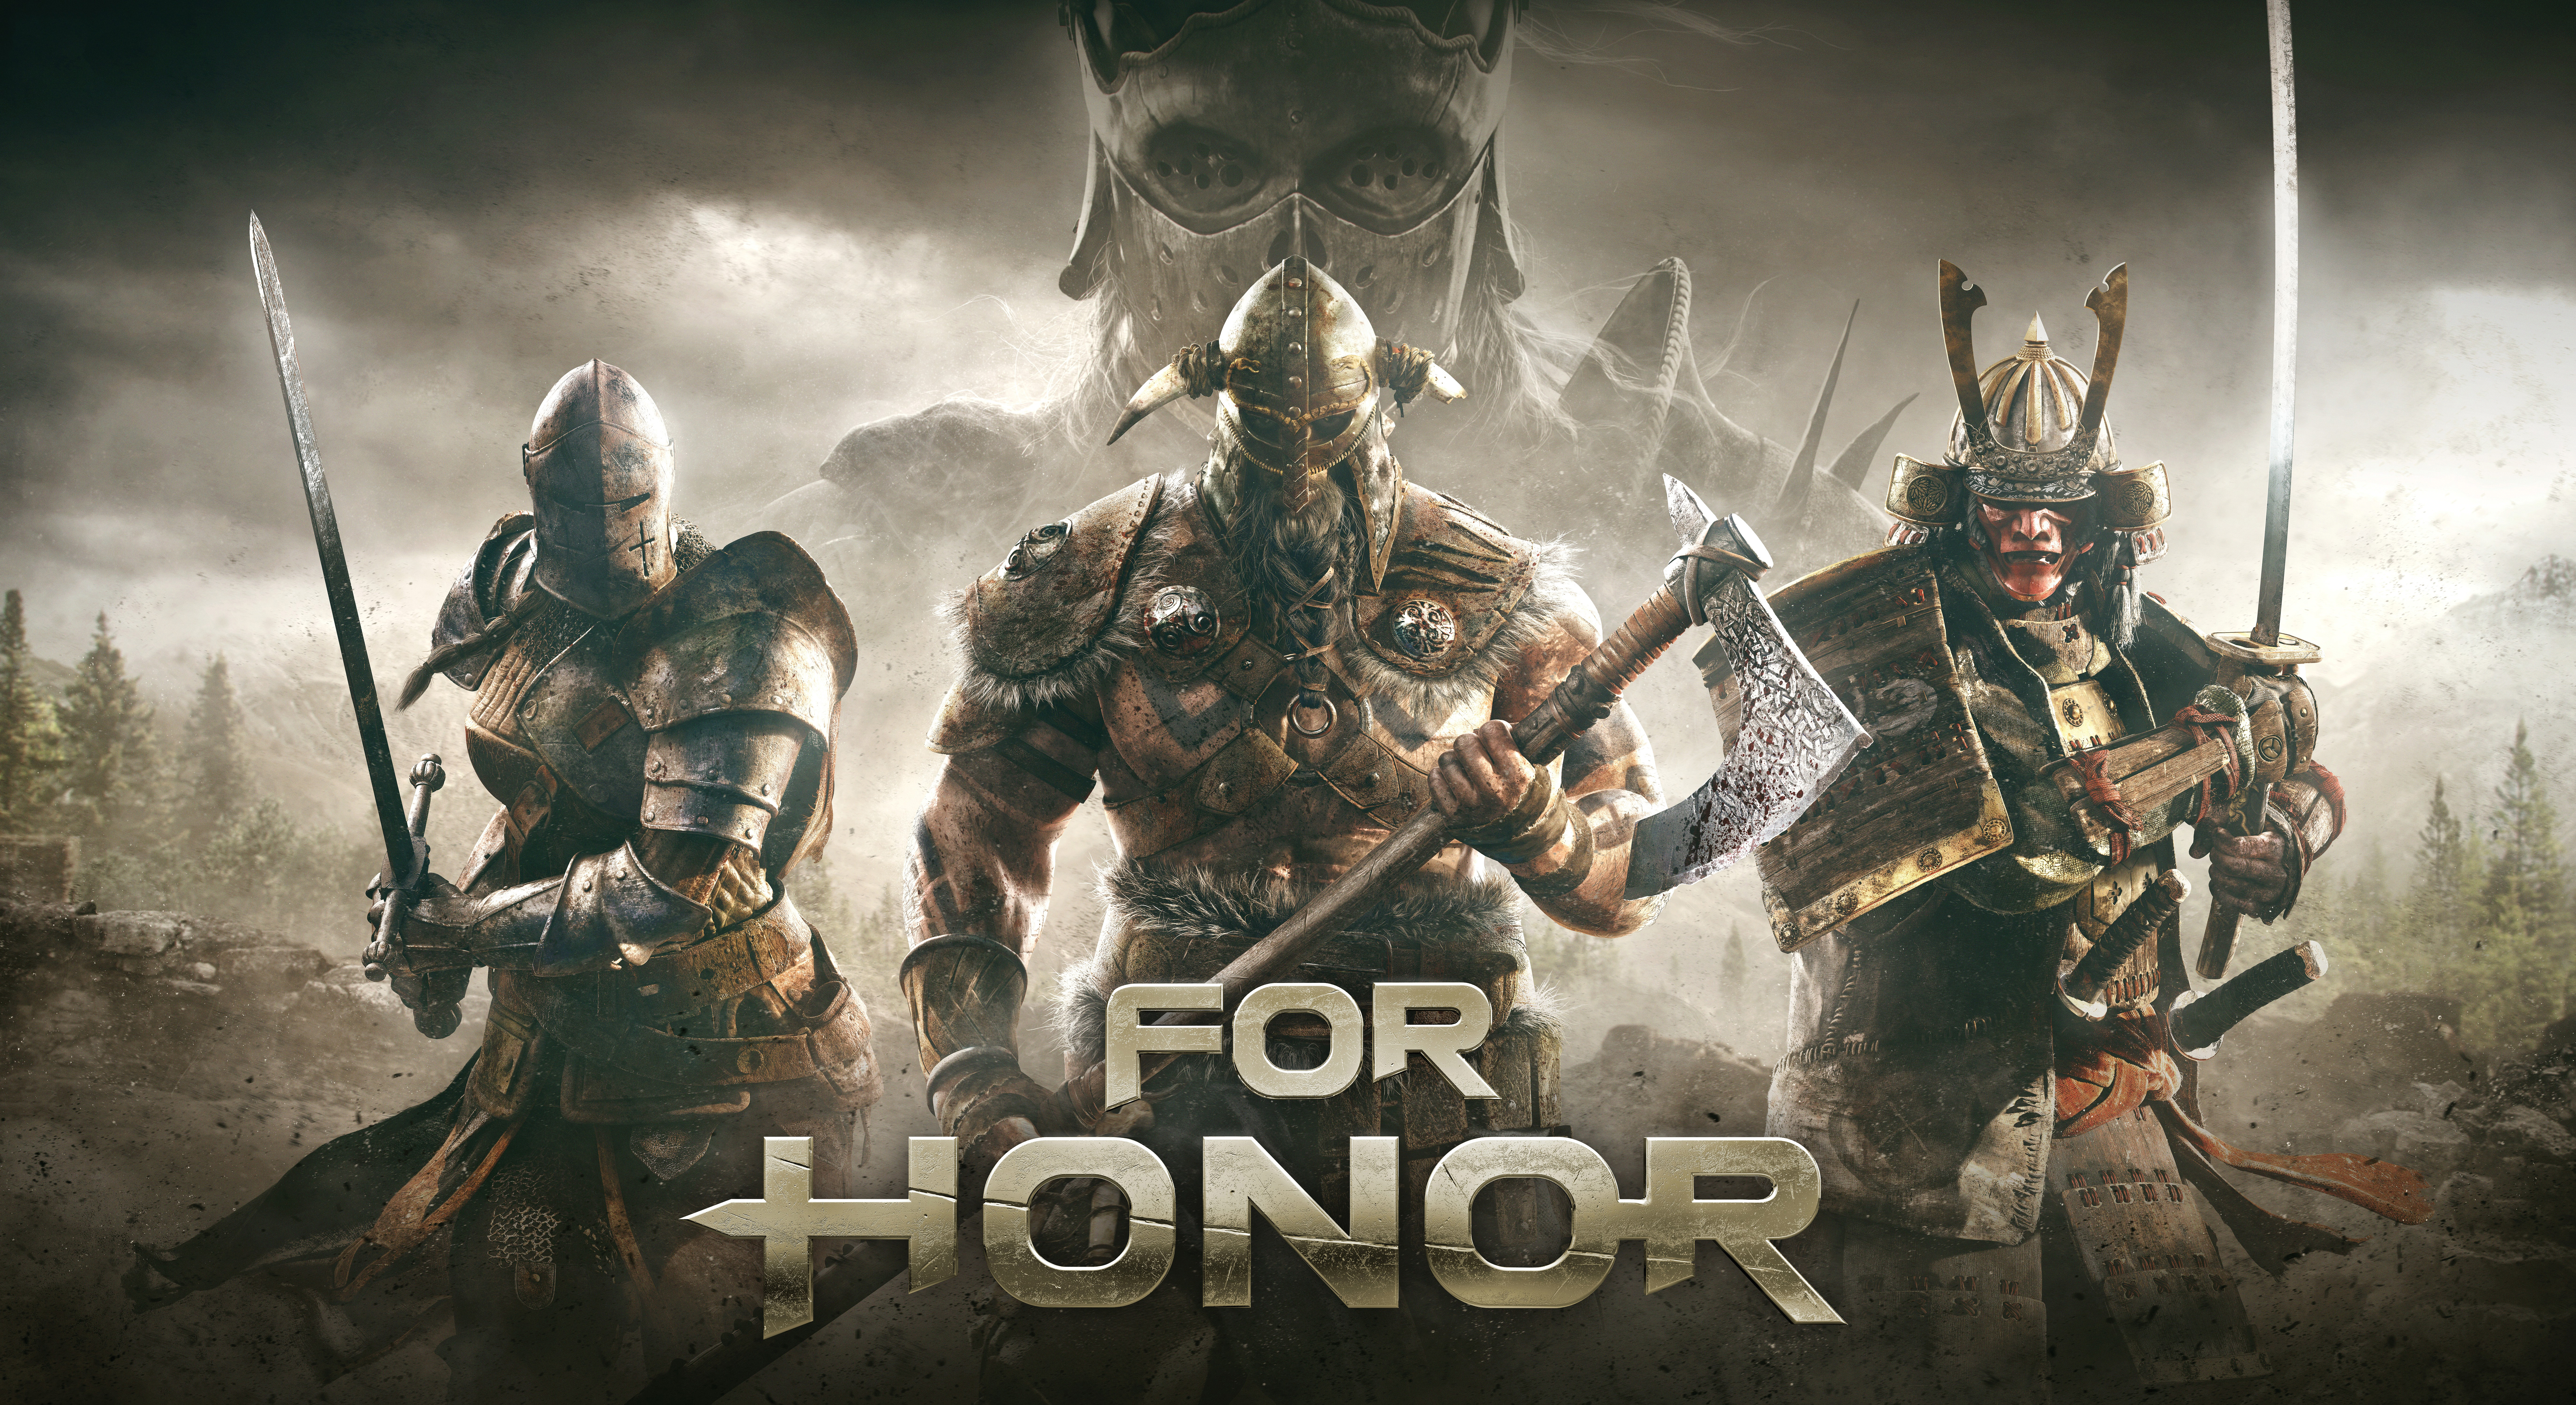 For Honor (Video Game) Wallpaper for desktop devices